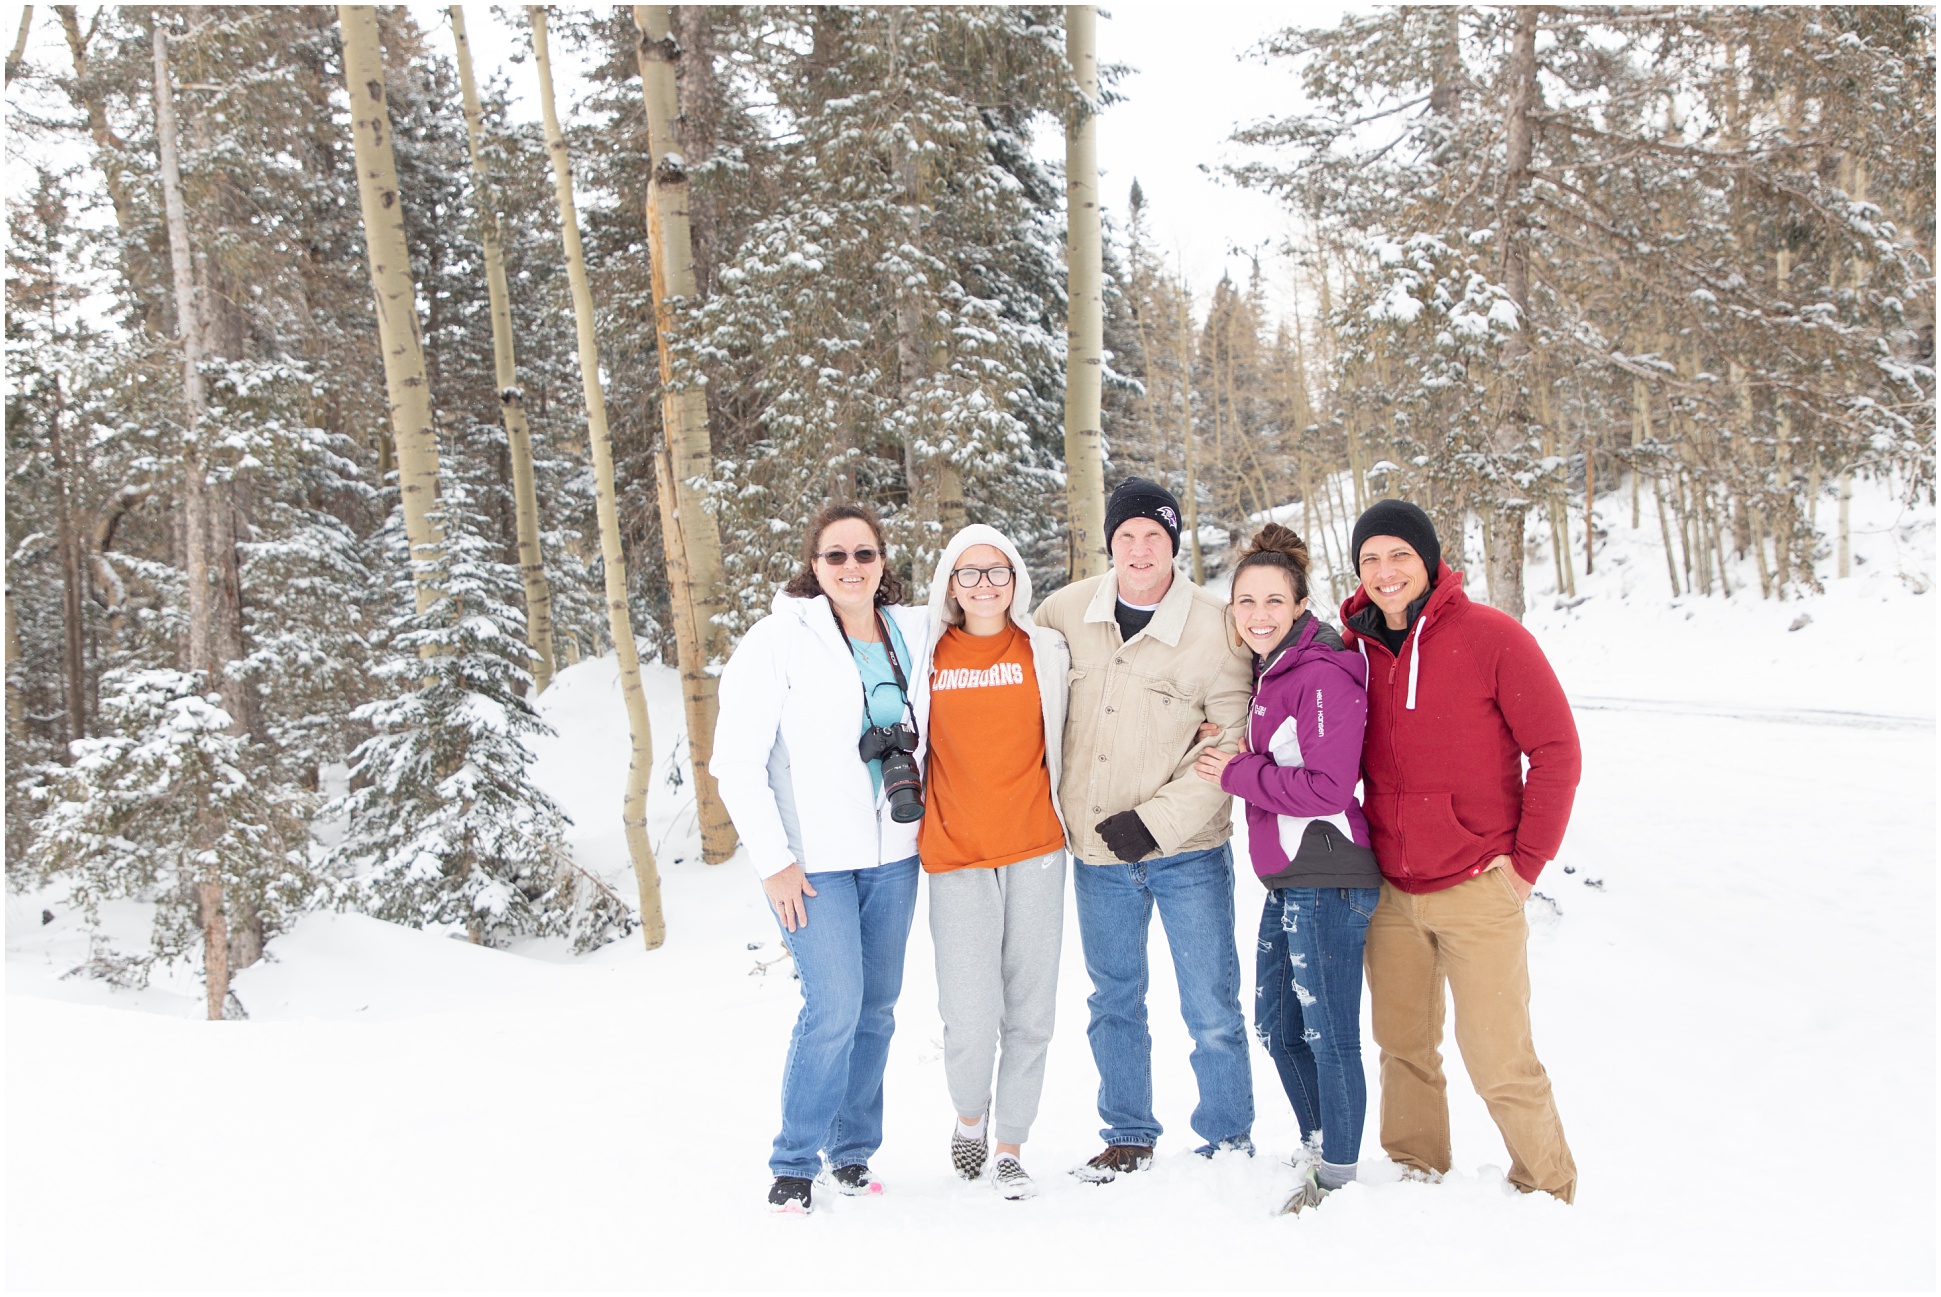 Family Photo in the snow at the snowbowl in Flagstaff, Arizona